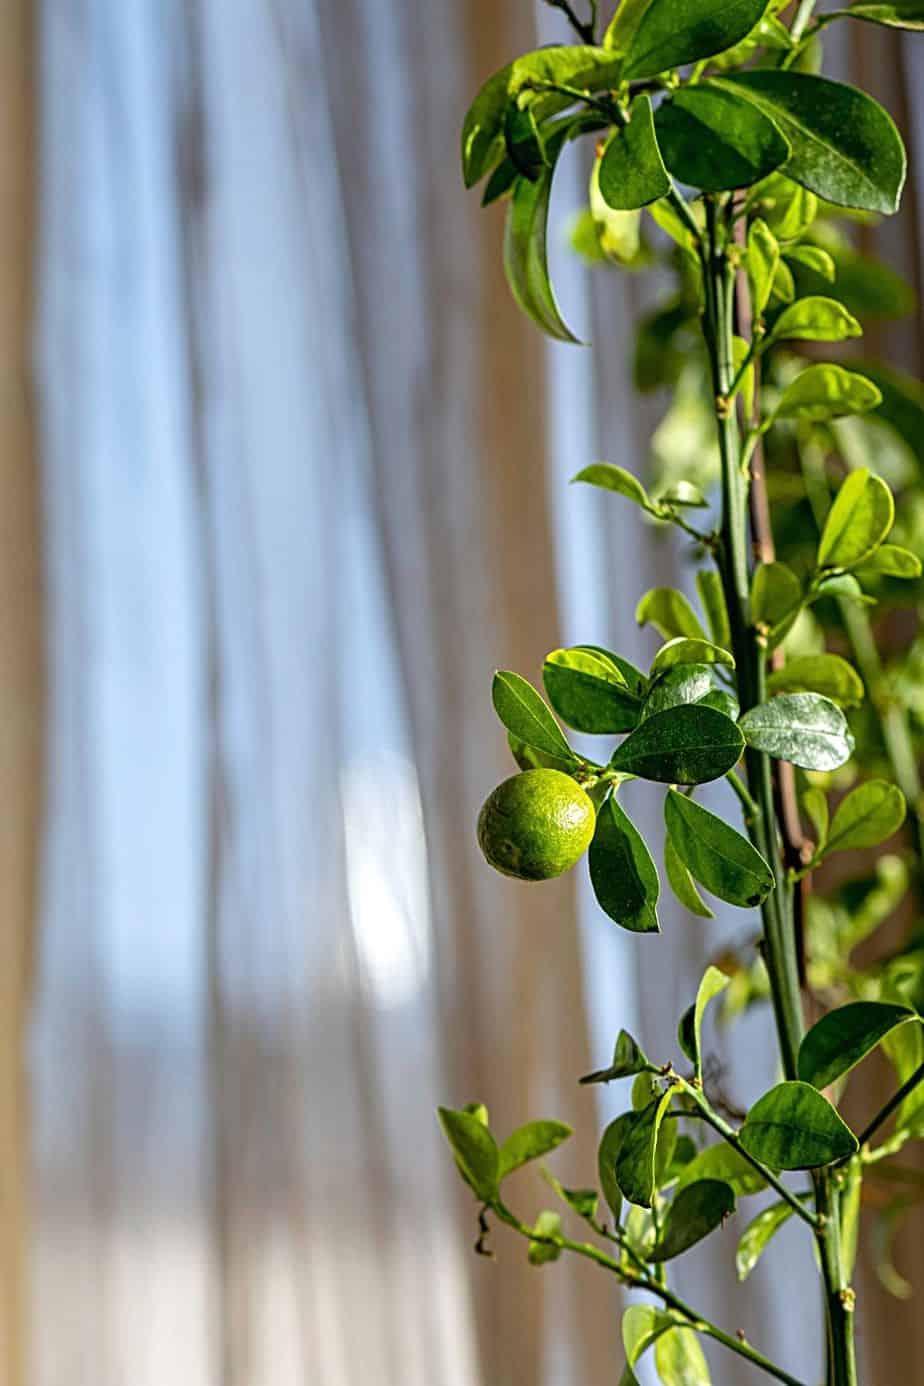 Dwarf Citrus is another great plant to grow by your southeast-facing window